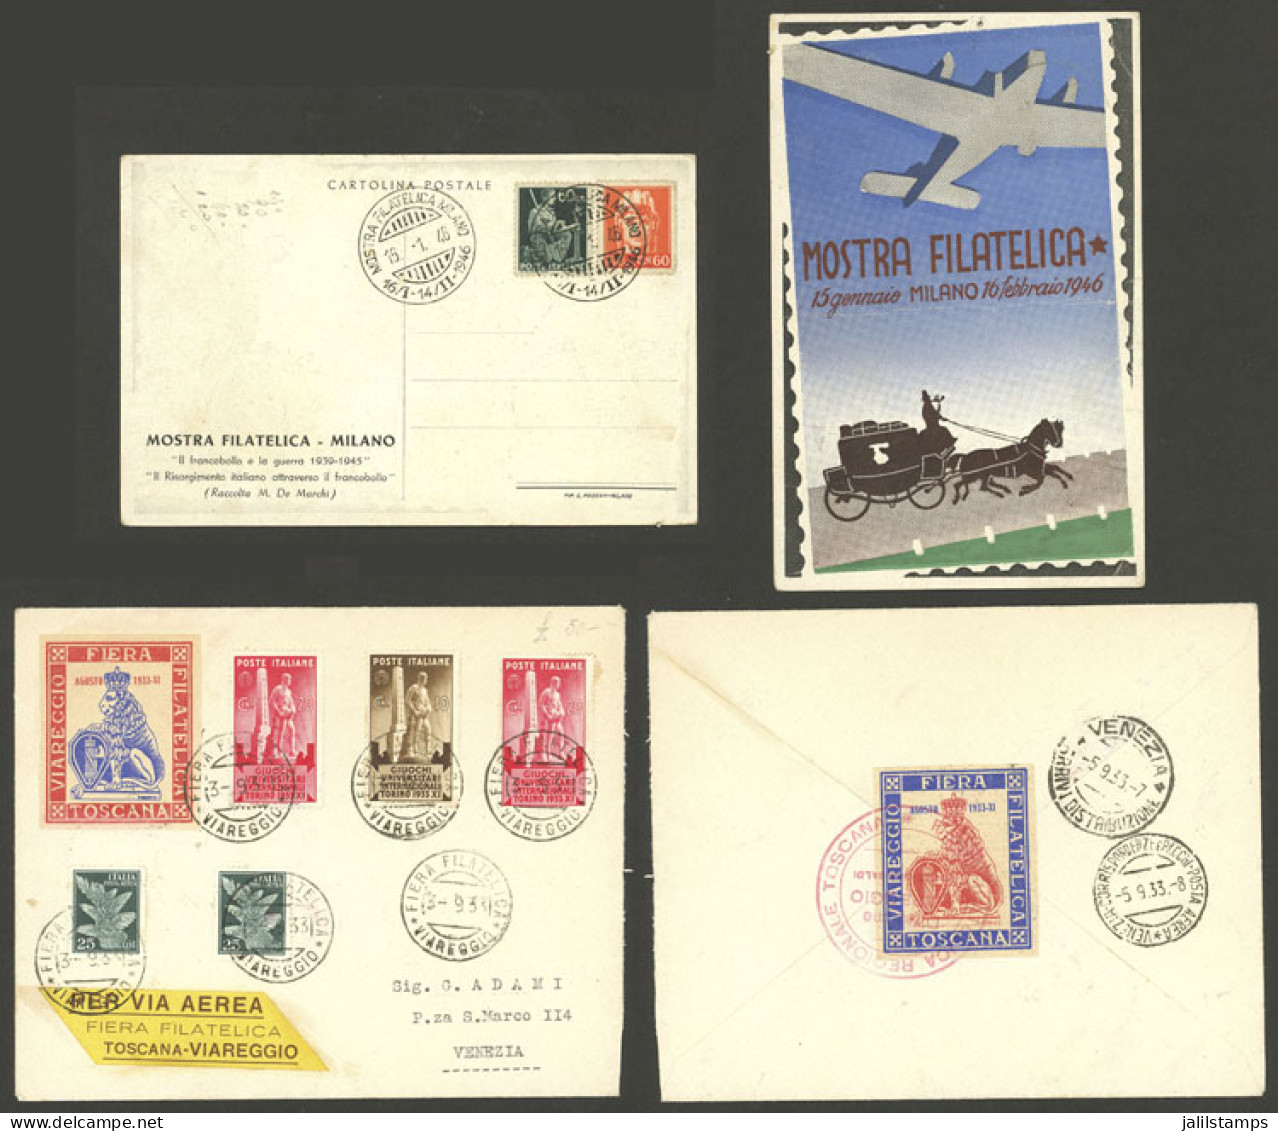 ITALY: Cover + Postcard Of The Year 1933 And 1946 Commemorating Philatelic Exhibitions, VF Quality! - Unclassified